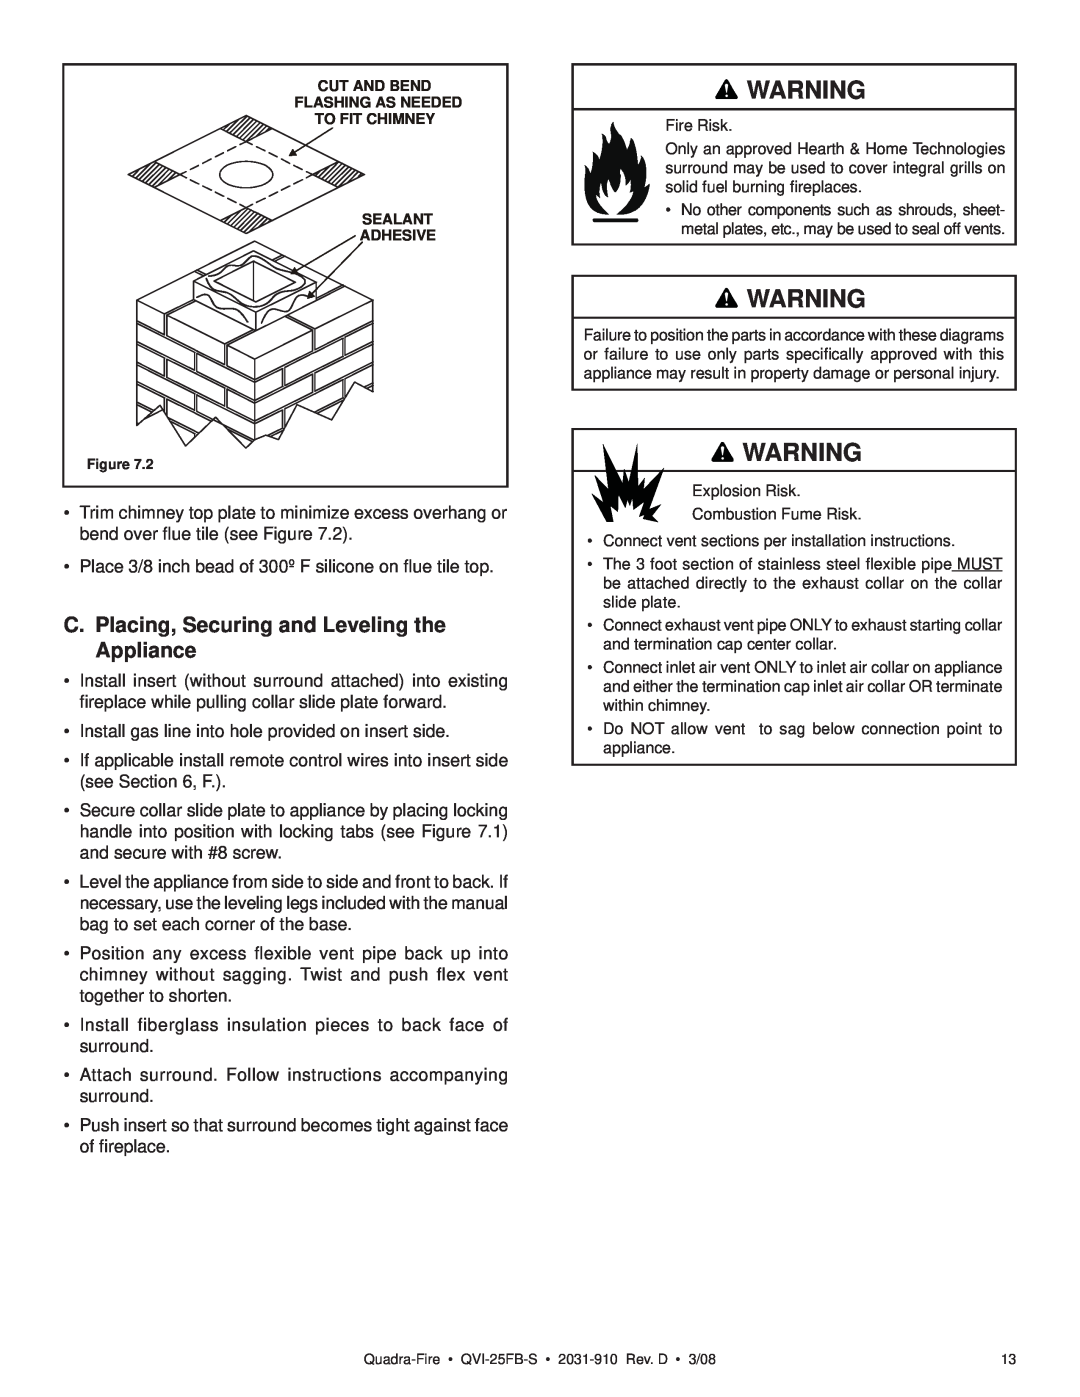 Quadra-Fire QVI-25FB-S owner manual C.Placing, Securing and Leveling the Appliance 